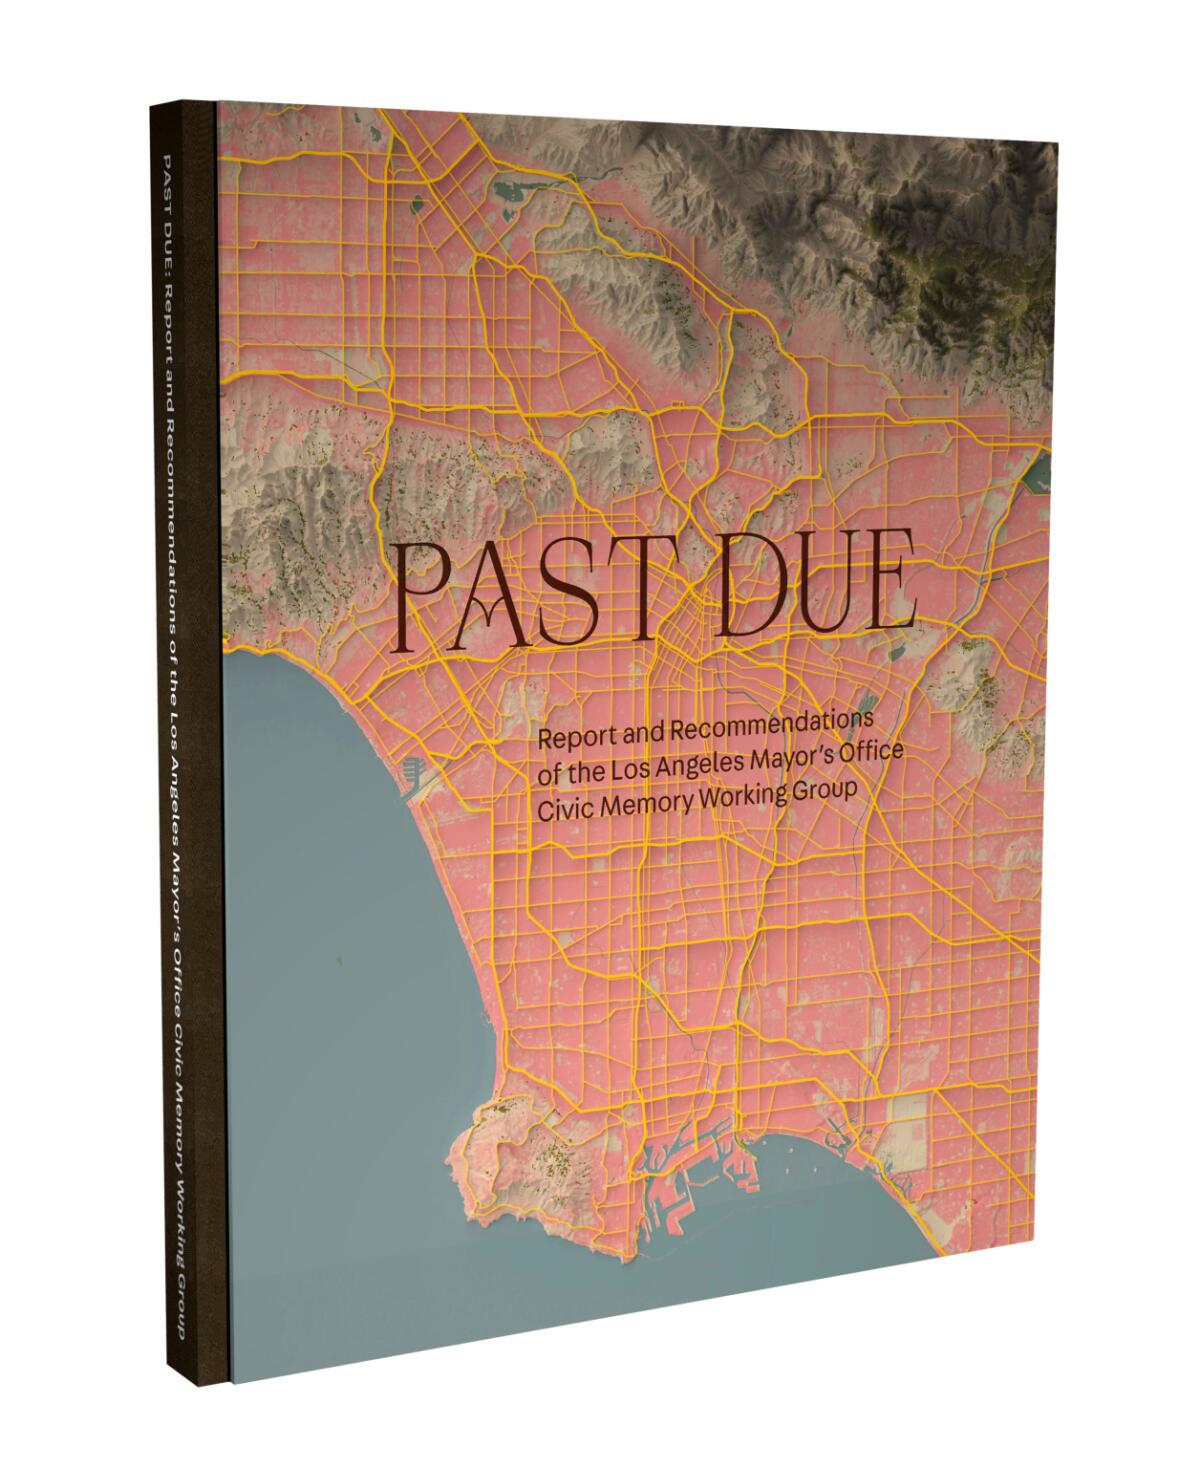 A book cover features an overview map of the Los Angeles basin in pink with freeways rendered in yellow